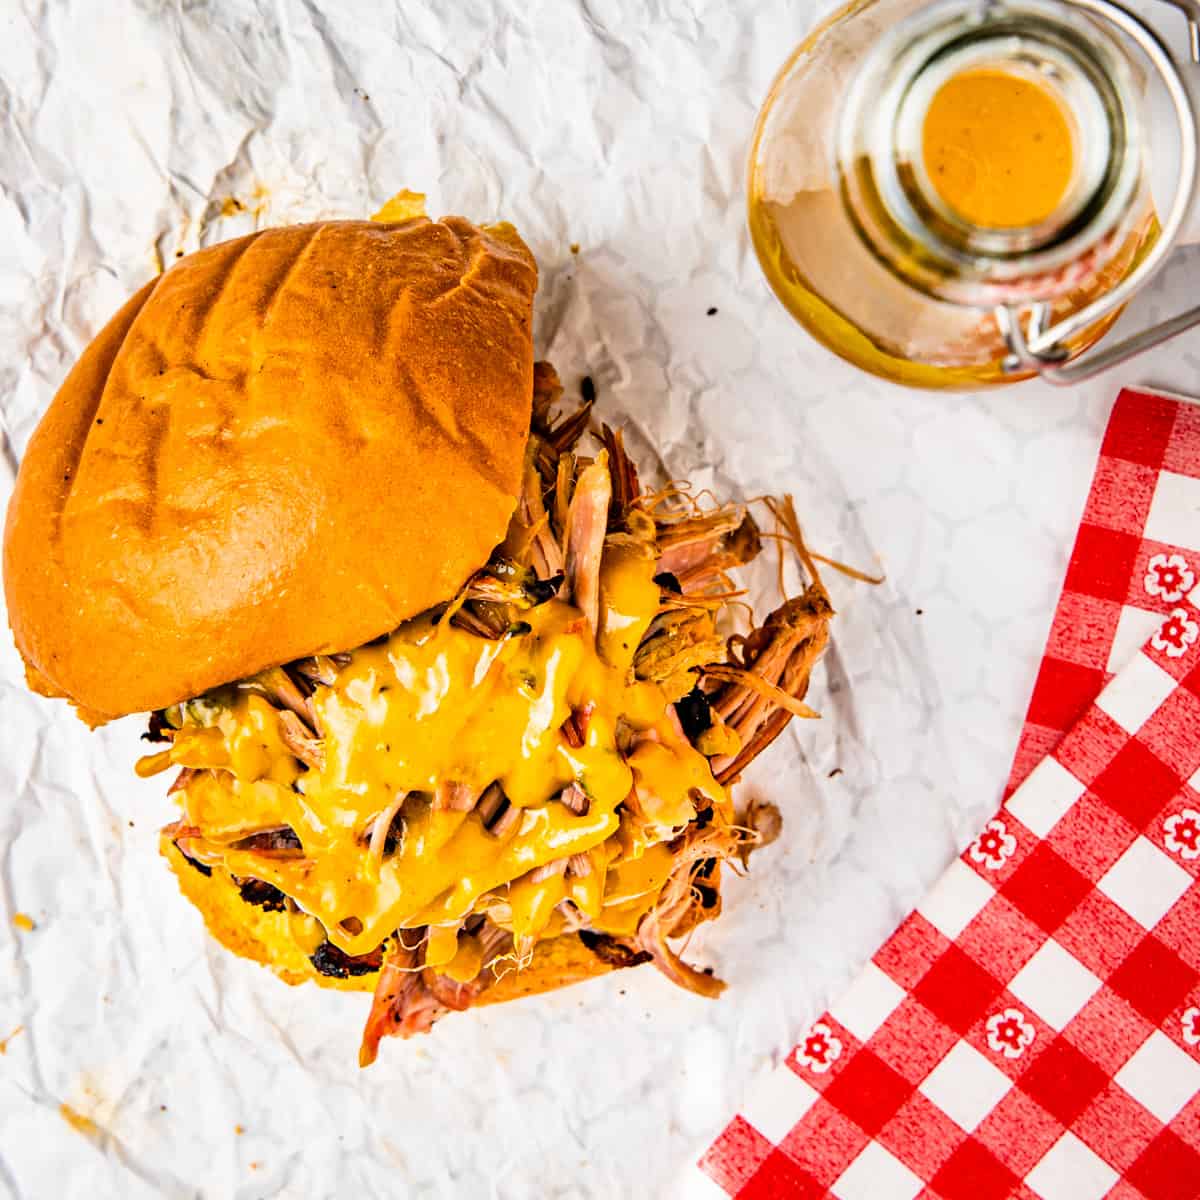 A pulled pork sandwich topped with golden bbq sauce.